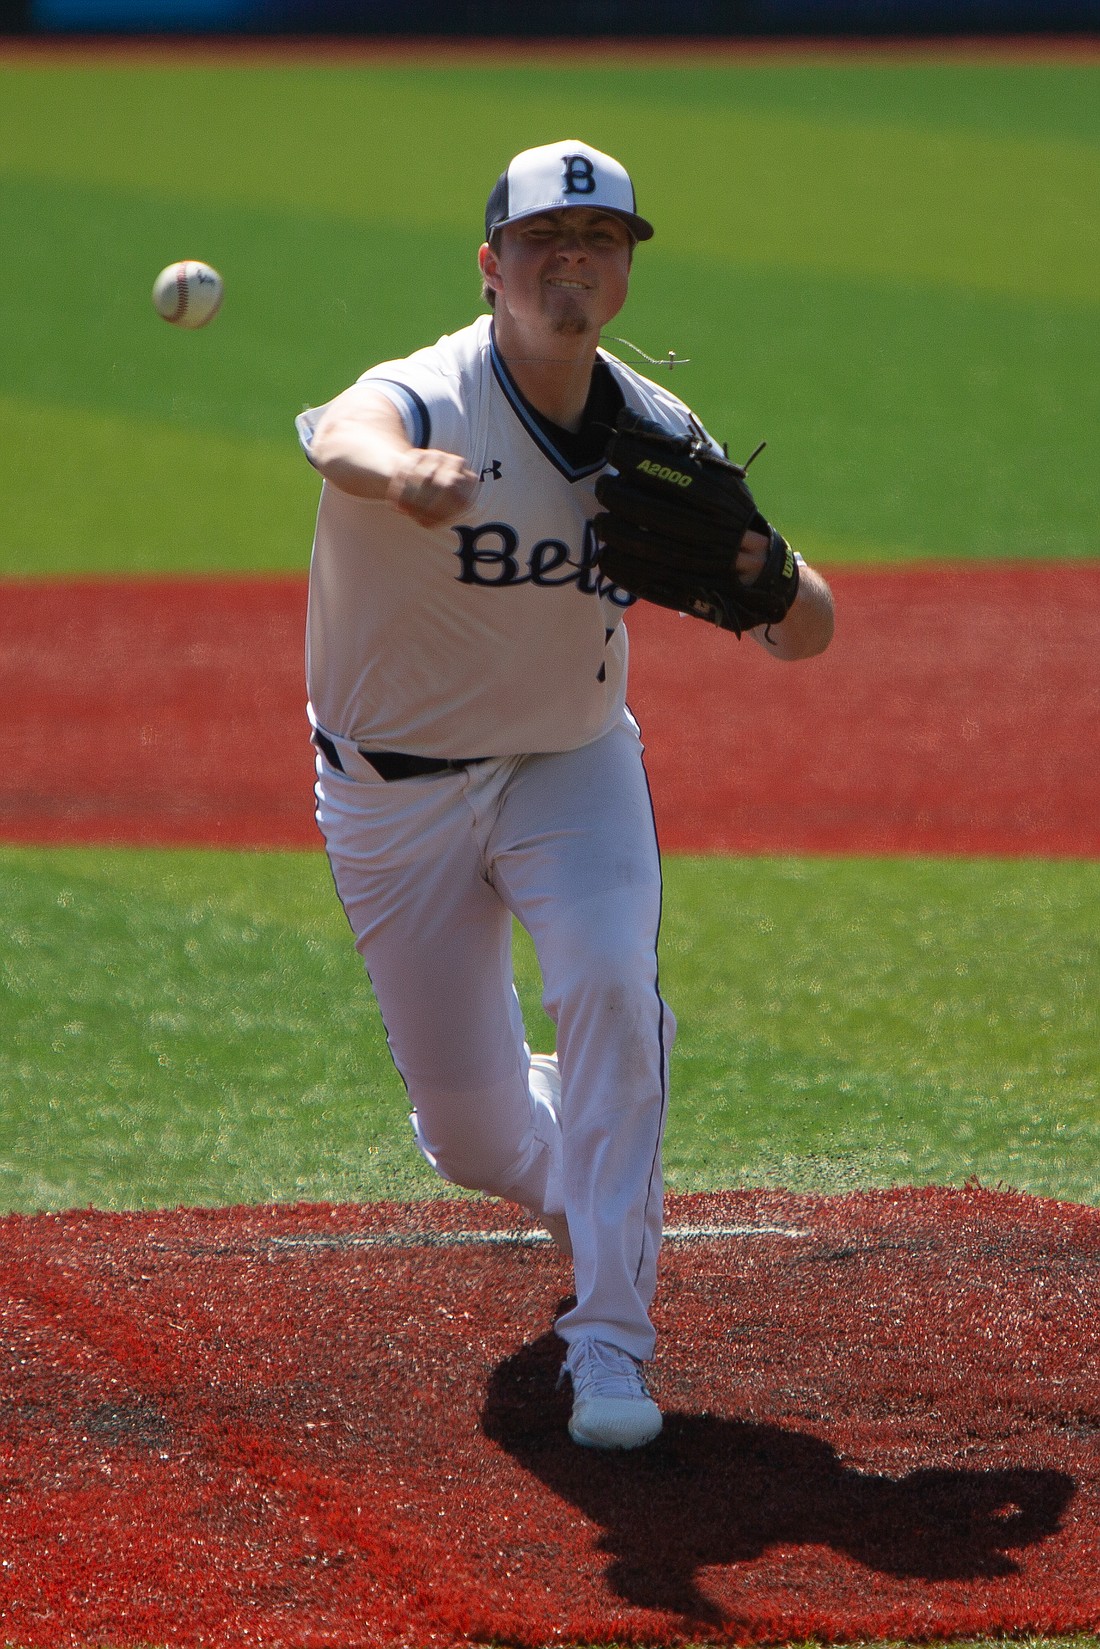 Bellingham Bells pitcher Connor Bourbon throws a pitch against the Kelowna Falcons July 24.